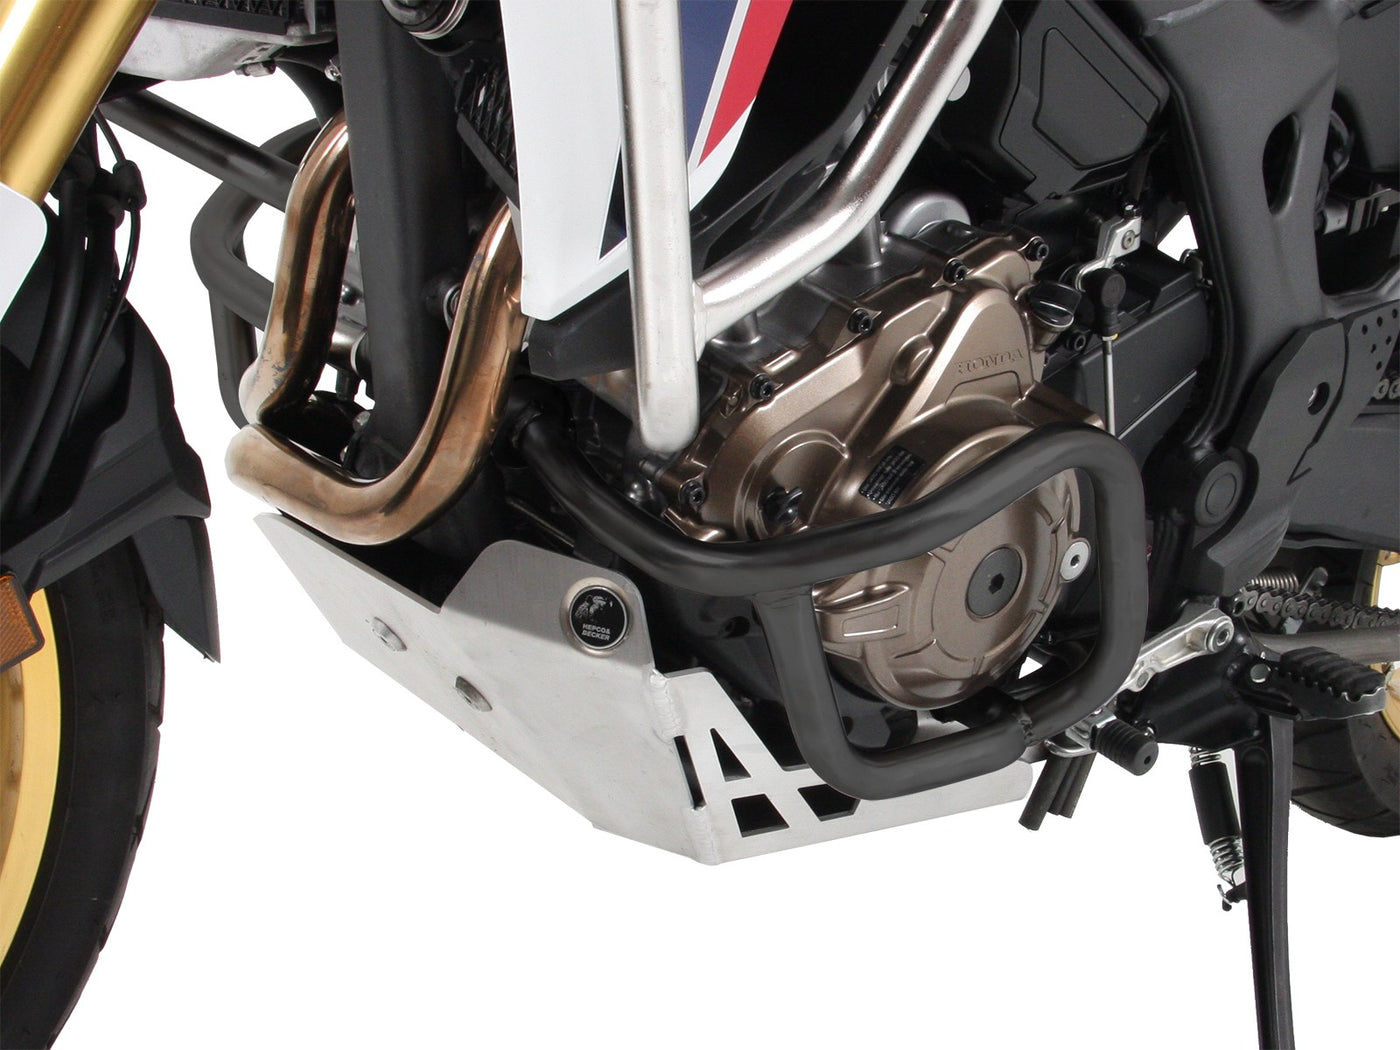 Engine Protection Bar for HONDA CRF 1000 Africa Twin (2016-2019)